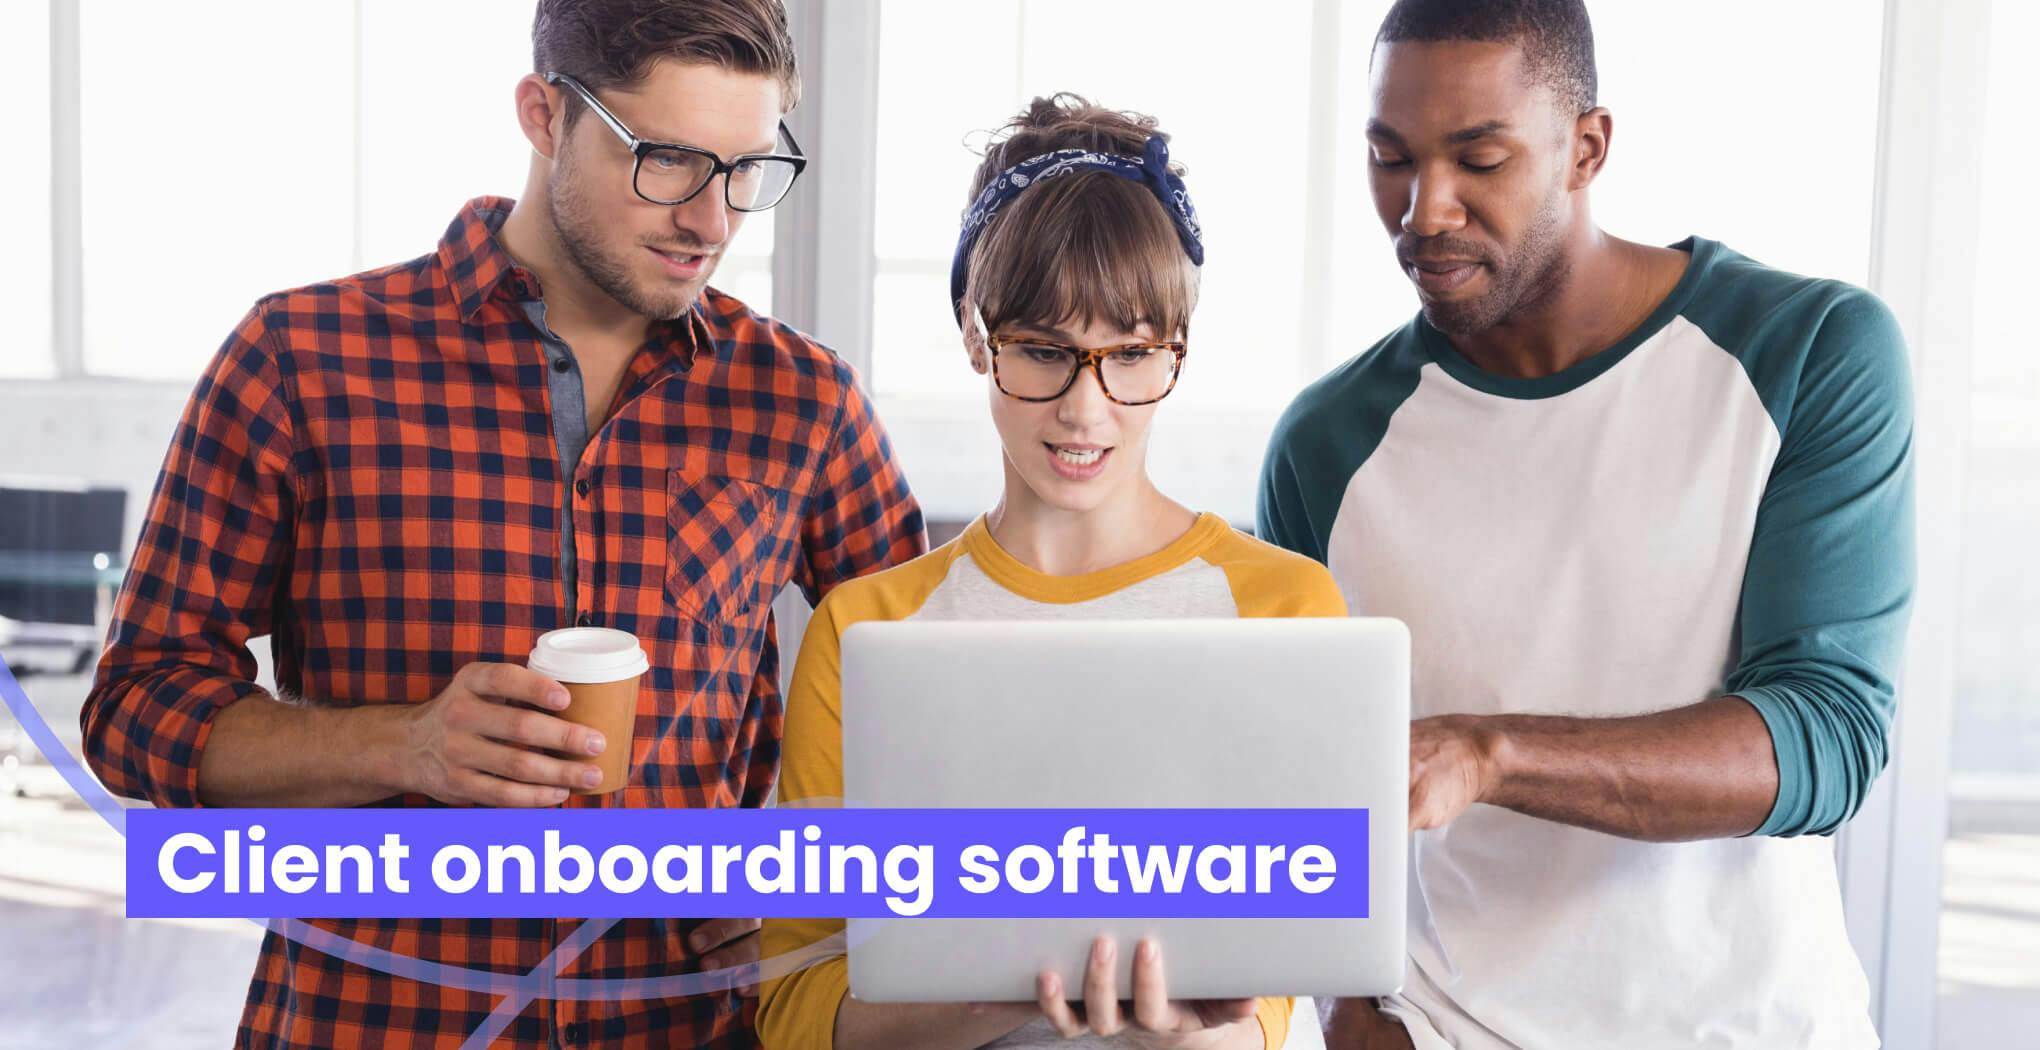 Client onboarding software